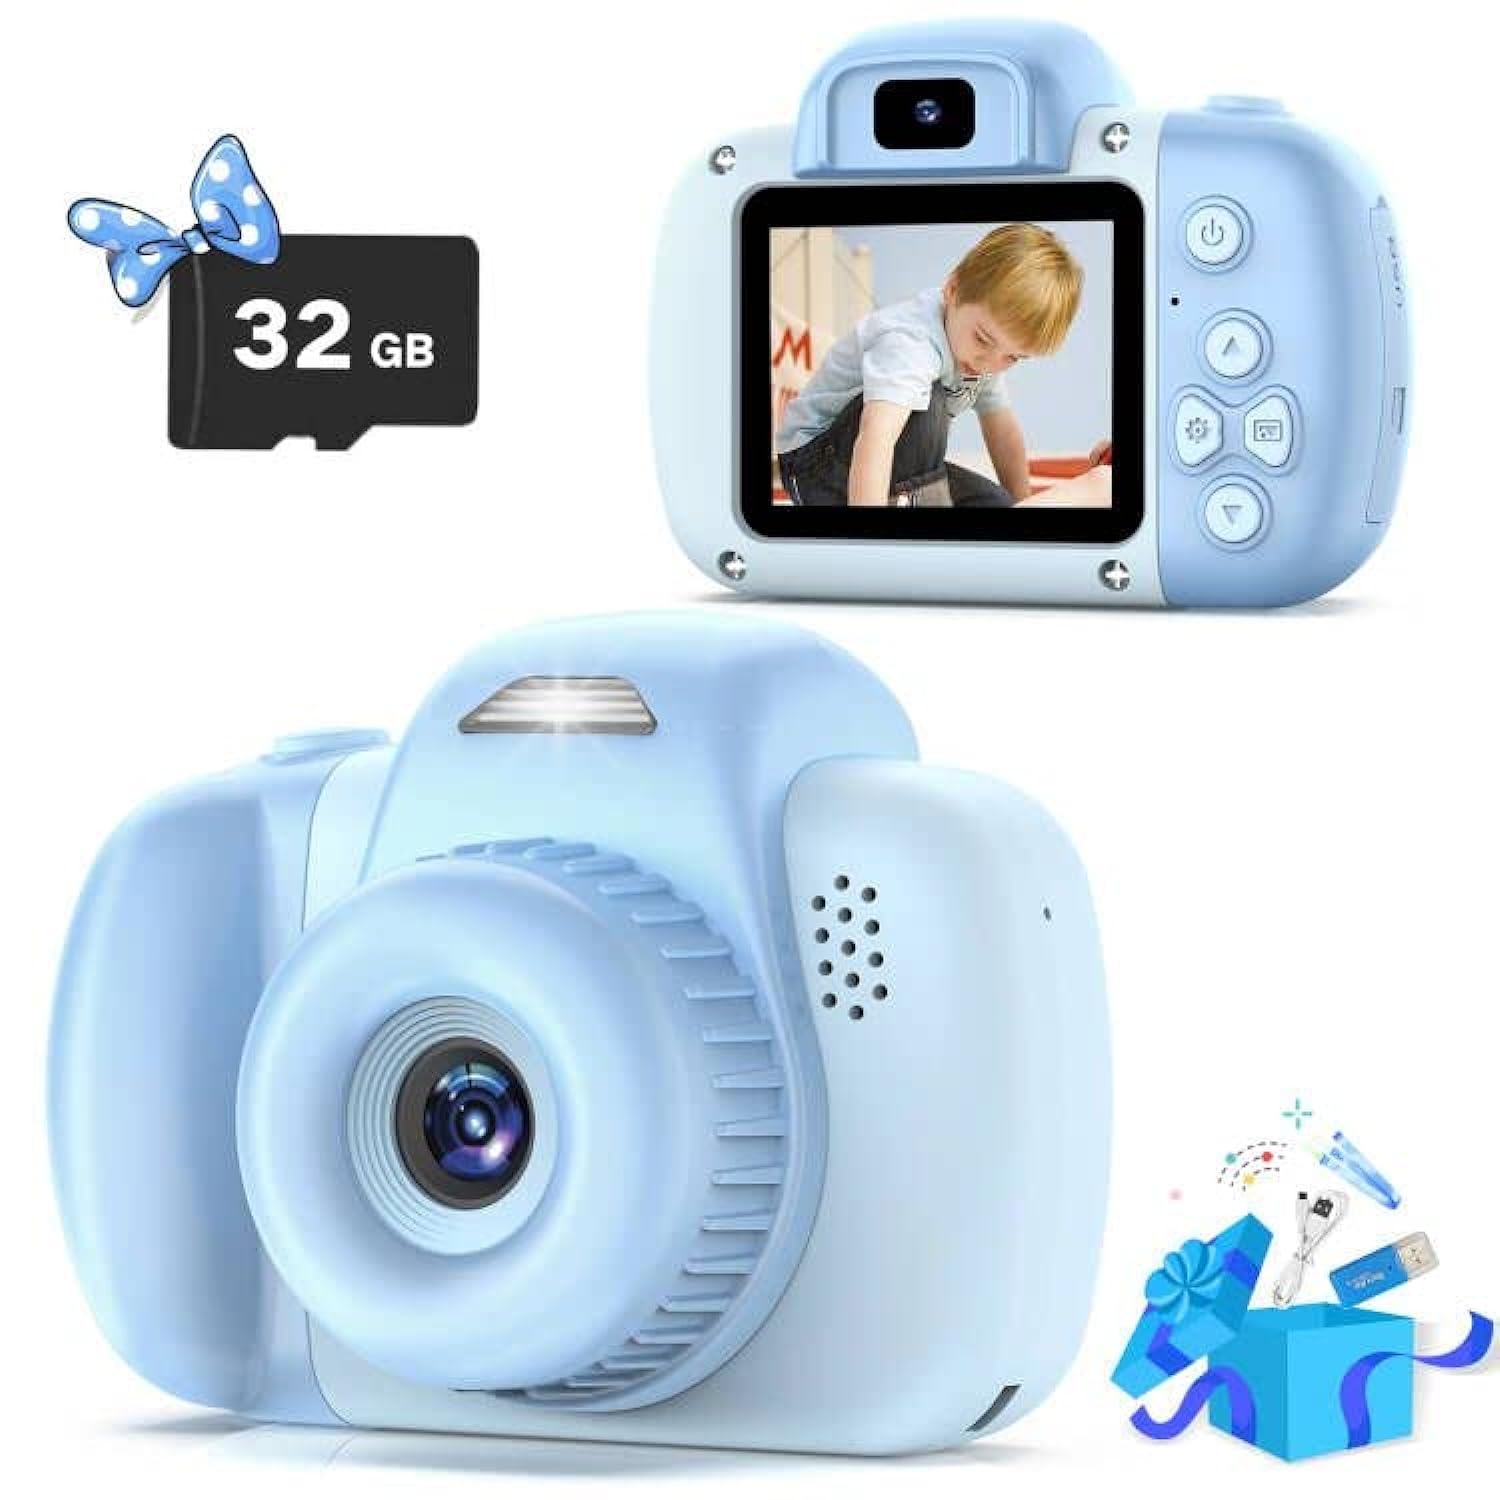 Great Choice Products Mini Kids Camera Toys For 3 4 5 6 7 8 Year Old Girls Boys, Toddler Children Digital Video Camcorder Camera, Best Chritmas 